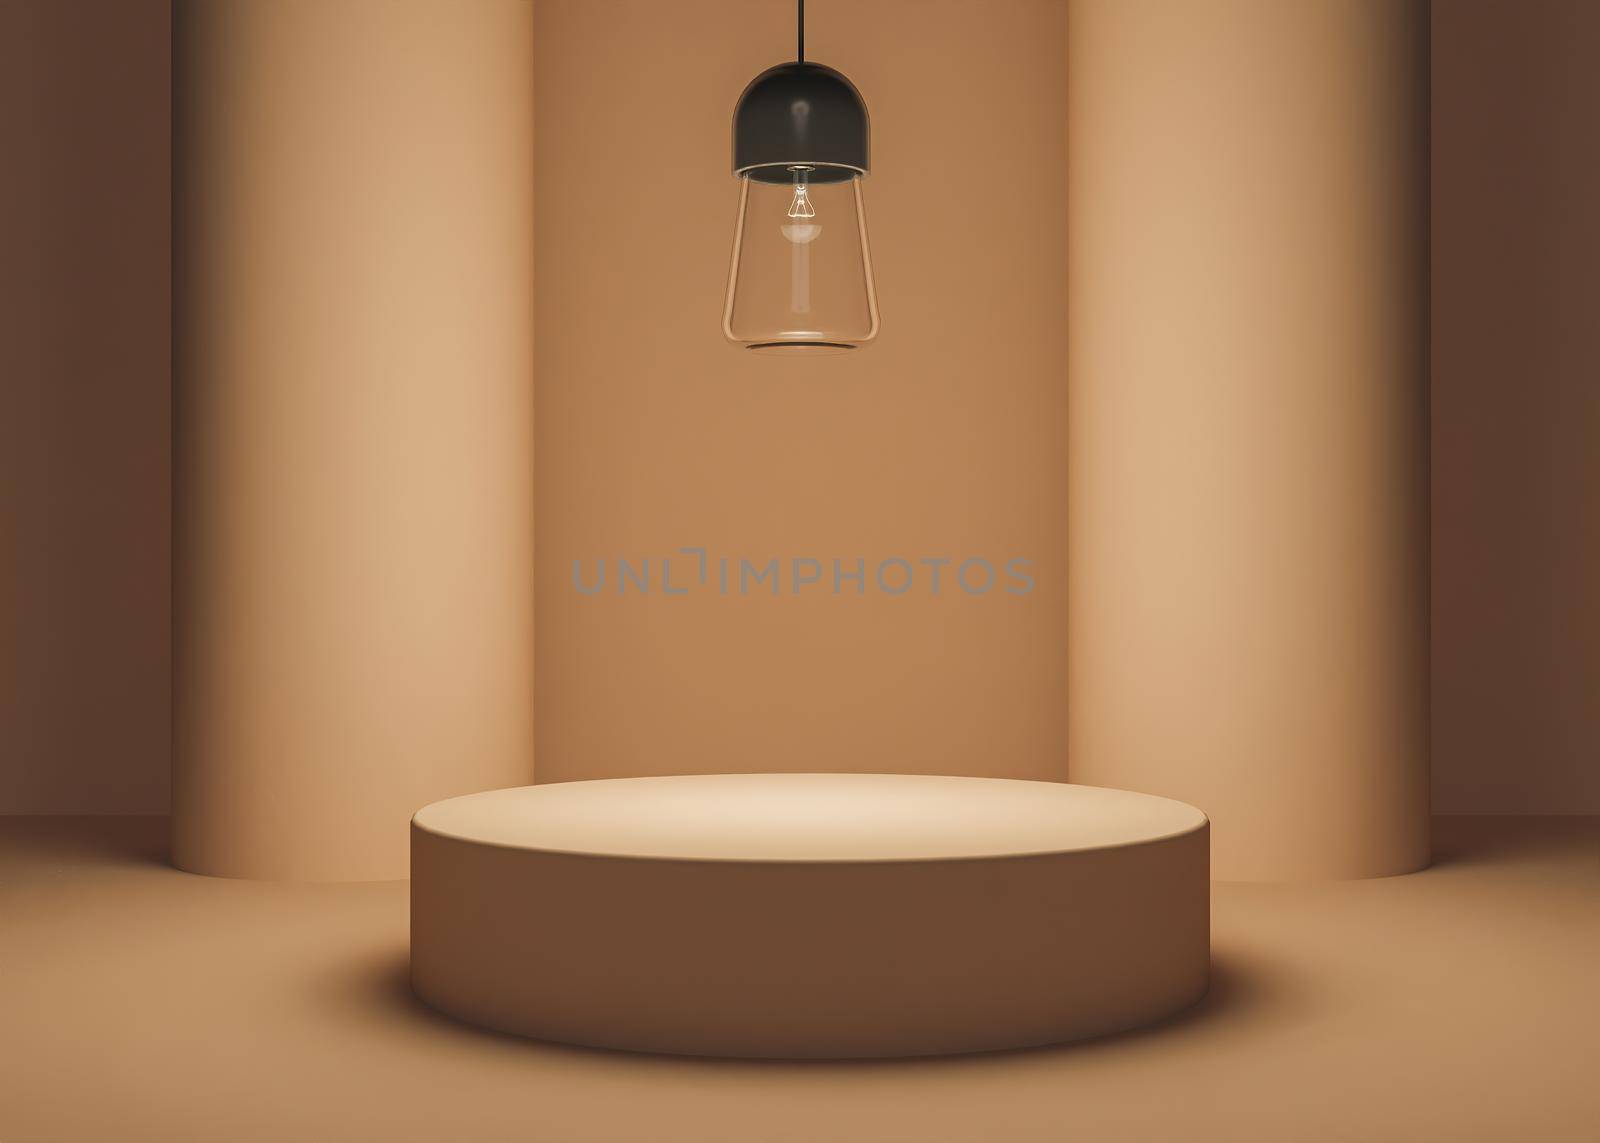 warm colored product stand with two cylindrical columns and glass lamp illuminating the scene. 3d rendering